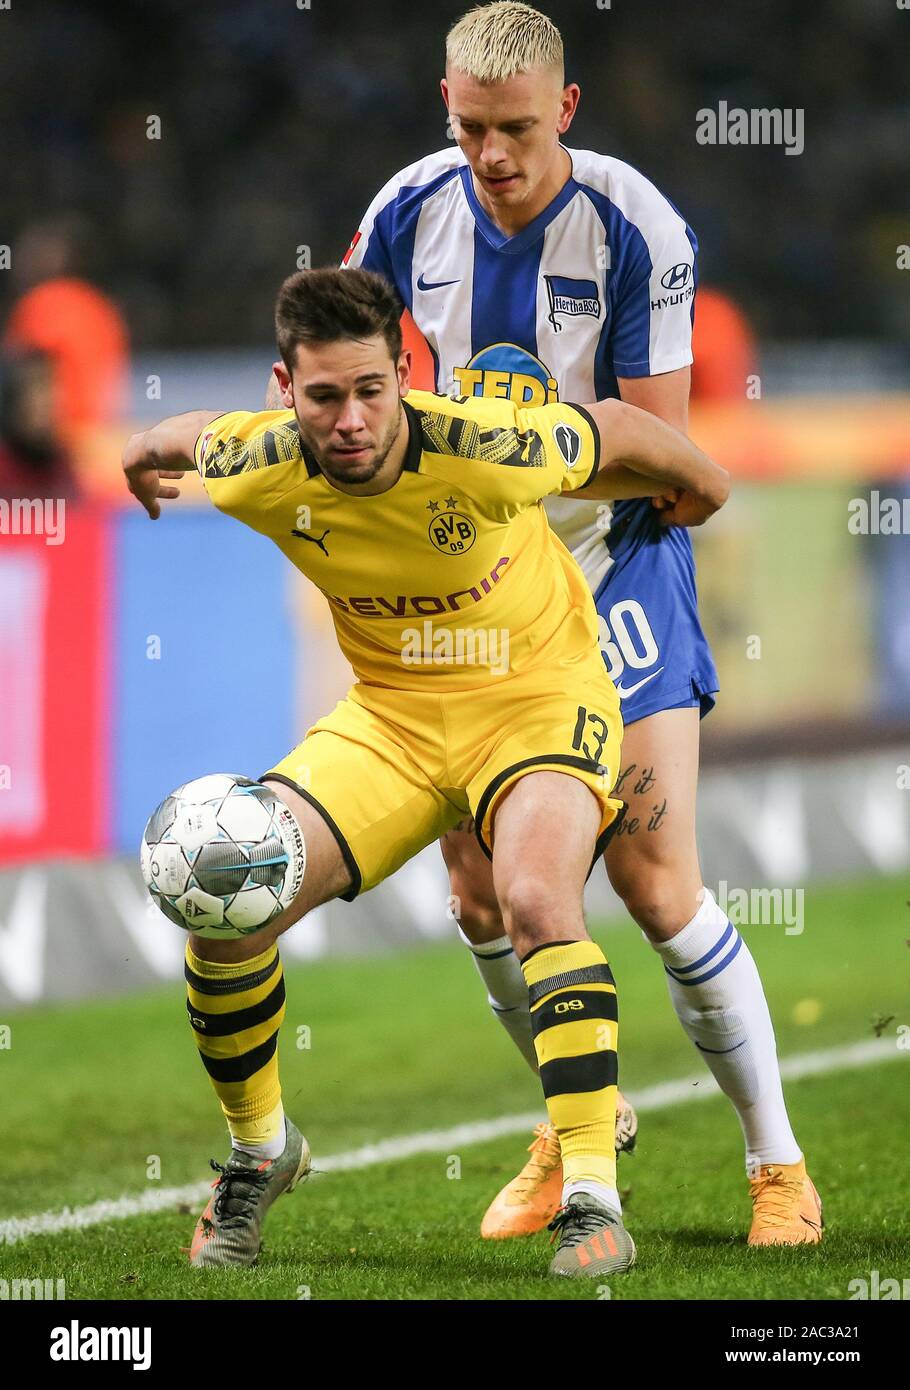 Berlin, Germany. 30th Nov, 2019. Soccer: Bundesliga, Hertha BSC - Borussia Dortmund, 13th matchday, Olympic Stadium. Raphael Guerreiro of Borussia Dortmund (l) fights against Berlin's Marius Wolf for the ball. Credit: Andreas Gora/dpa - IMPORTANT NOTE: In accordance with the requirements of the DFL Deutsche Fußball Liga or the DFB Deutscher Fußball-Bund, it is prohibited to use or have used photographs taken in the stadium and/or the match in the form of sequence images and/or video-like photo sequences./dpa/Alamy Live News Stock Photo